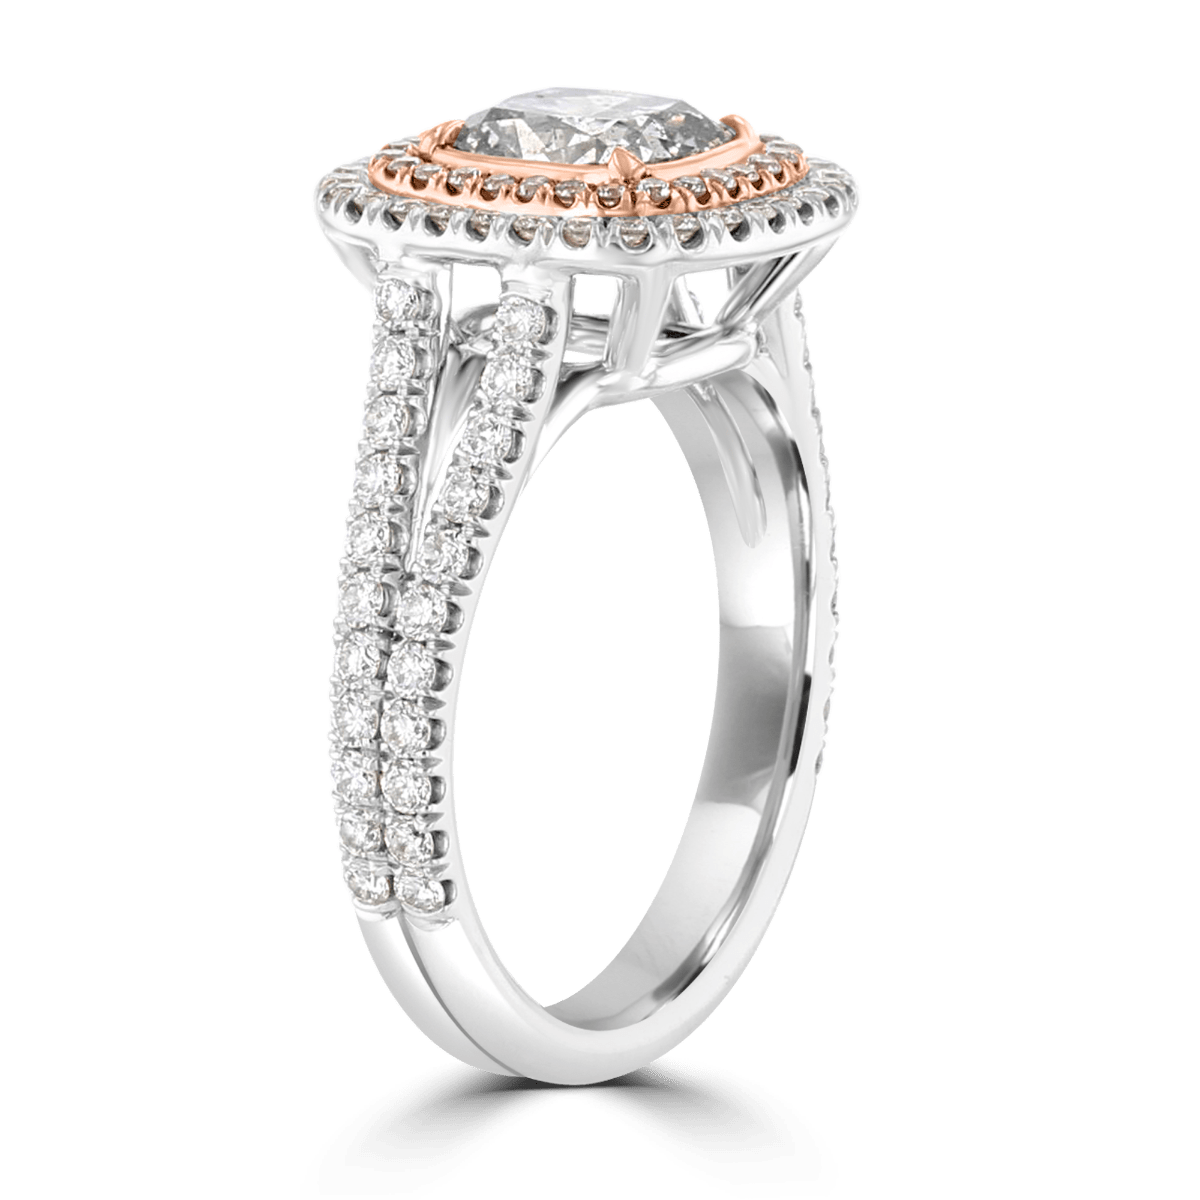 18KT White Gold 2.43 CTW Gray, Pink, & Near Colorless Diamond Halo Ring 4,4.5,5,5.5,6,6.5,7,7.5,8,8.5,9